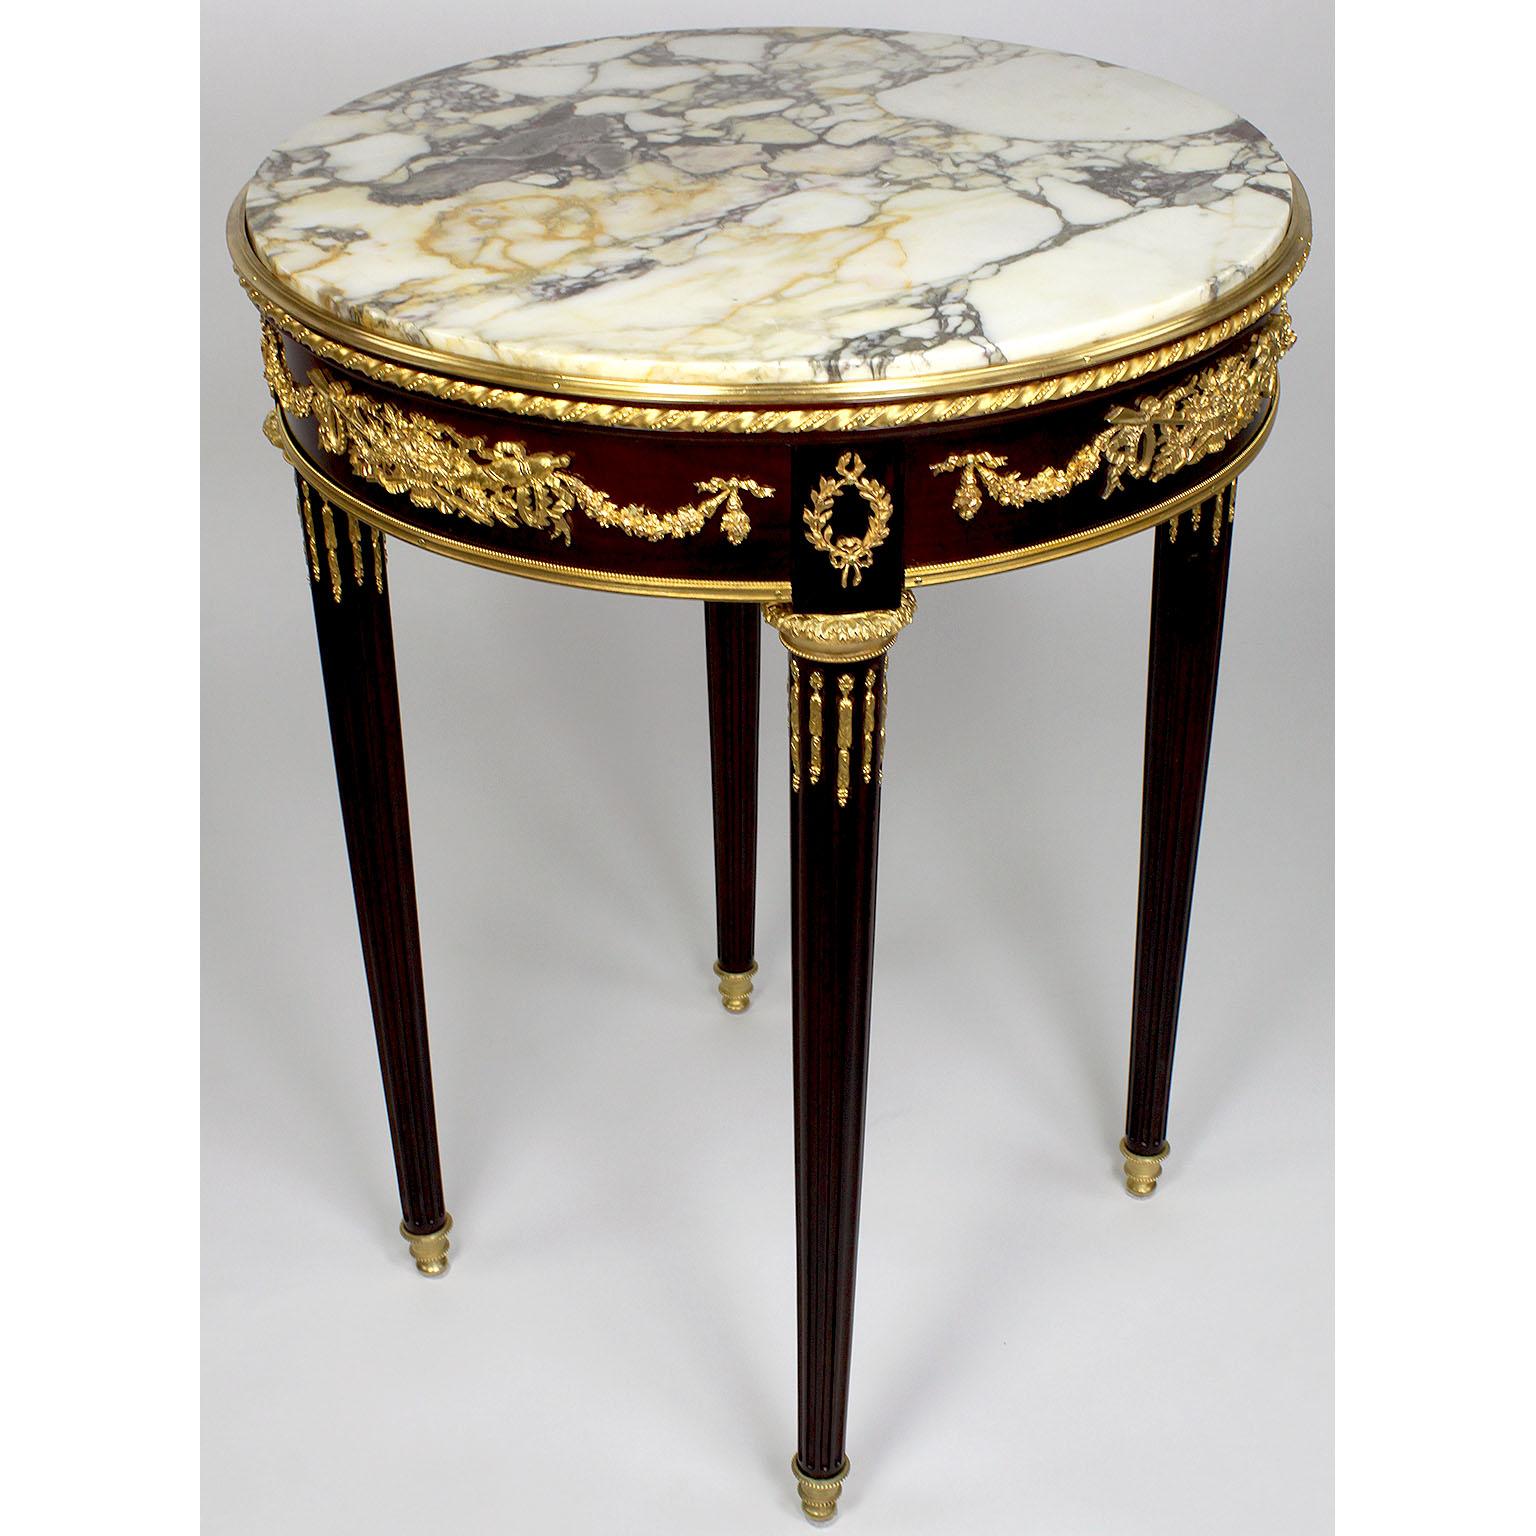 A very fine French 19th-20th century Louis XVI style mahogany and gilt bronze (Ormolu) mounted guéridon side table with marble top, attributed to François Linke, (1855-1946). The single drawer table with an inset round Brêche marble top surmounted